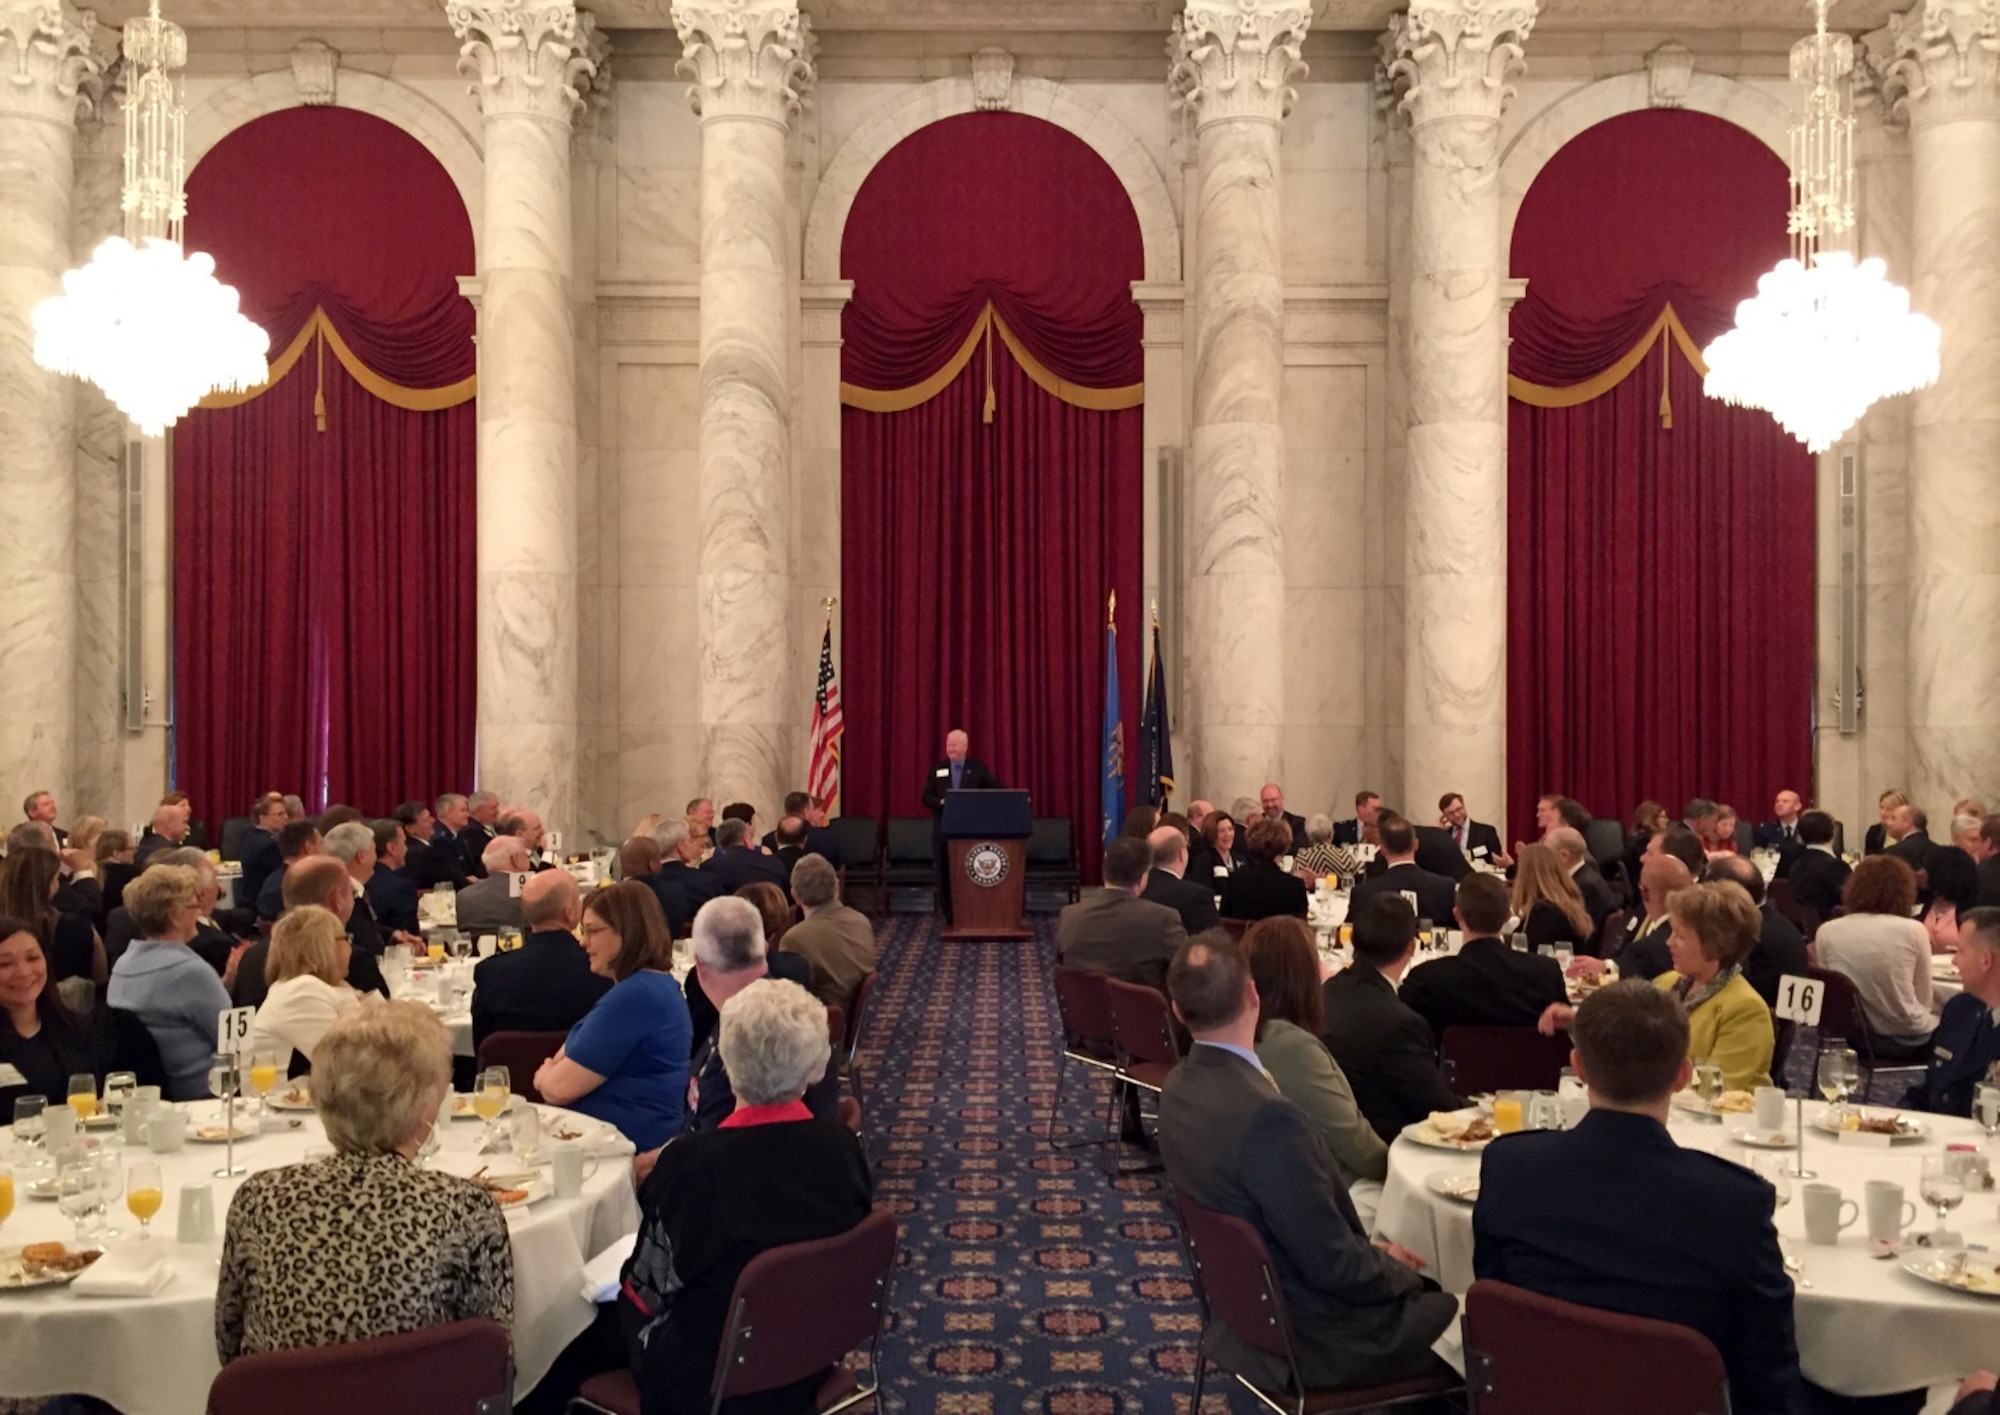 Washington -- Dr. Joe Leverett, Chairman of the Altus Military Affairs Committee, speaks to the audience during the 53rd Annual Altus Quail Breakfast in the Russell Senate Office Building, Kennedy Caucus Room, March 26, 2015. The quail breakfast is an annual event that celebrates the unique relationship between the Oklahoma Delegation, the City of Altus and the U.S. Air Force. (U.S. Air Force photo by Senior Airman Robert Gunn/Released)